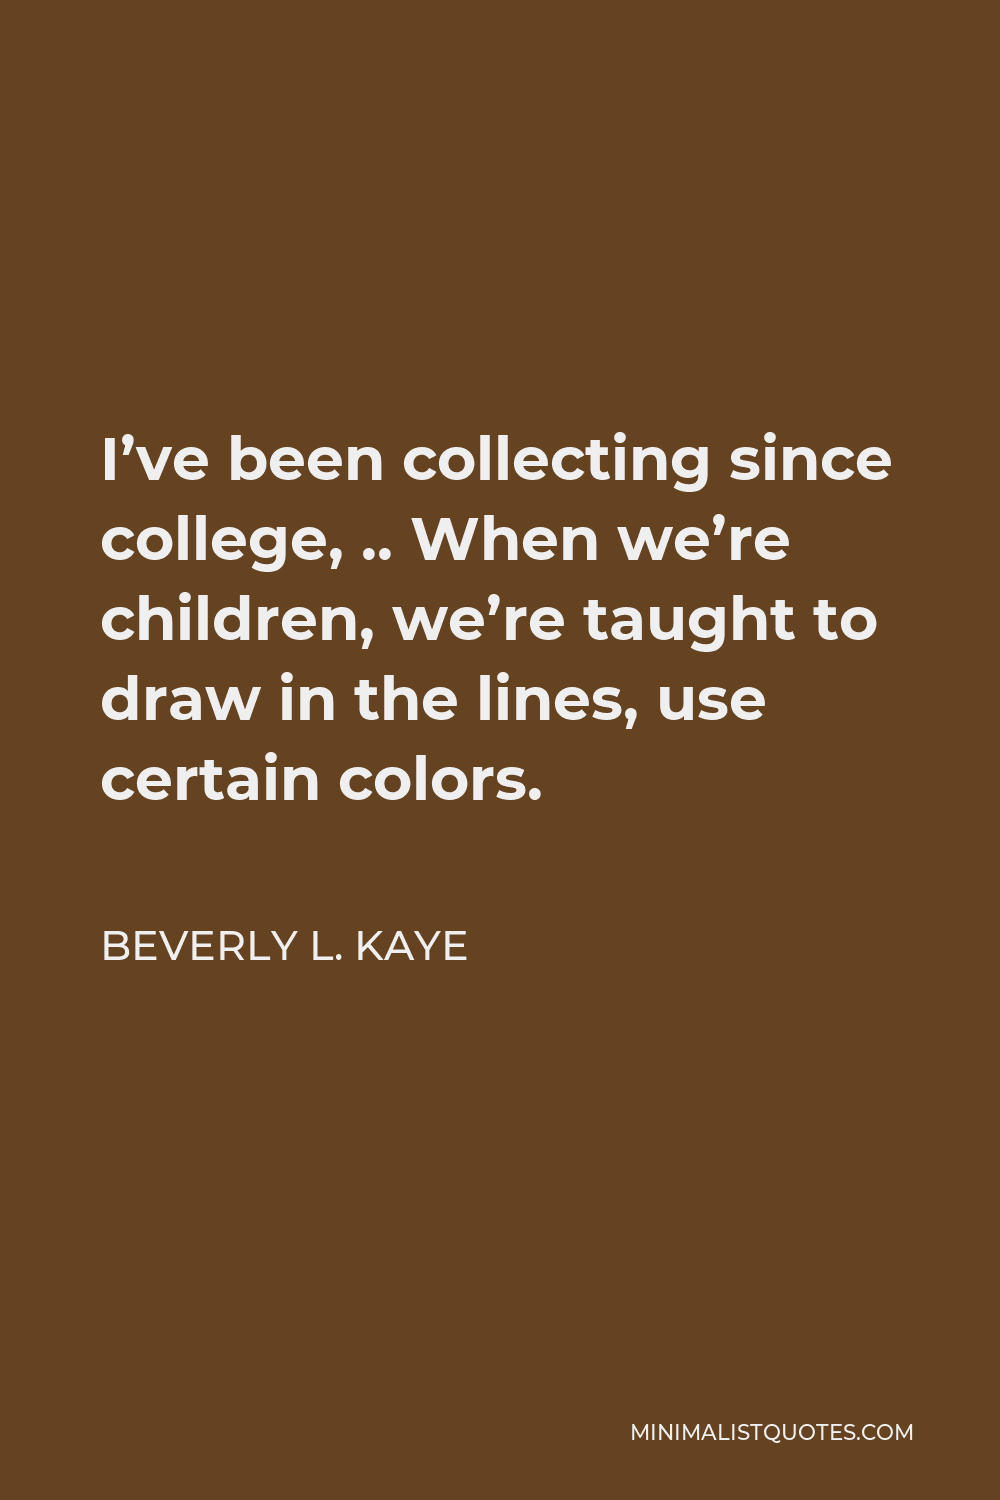 Beverly L. Kaye Quote - I’ve been collecting since college, .. When we’re children, we’re taught to draw in the lines, use certain colors.